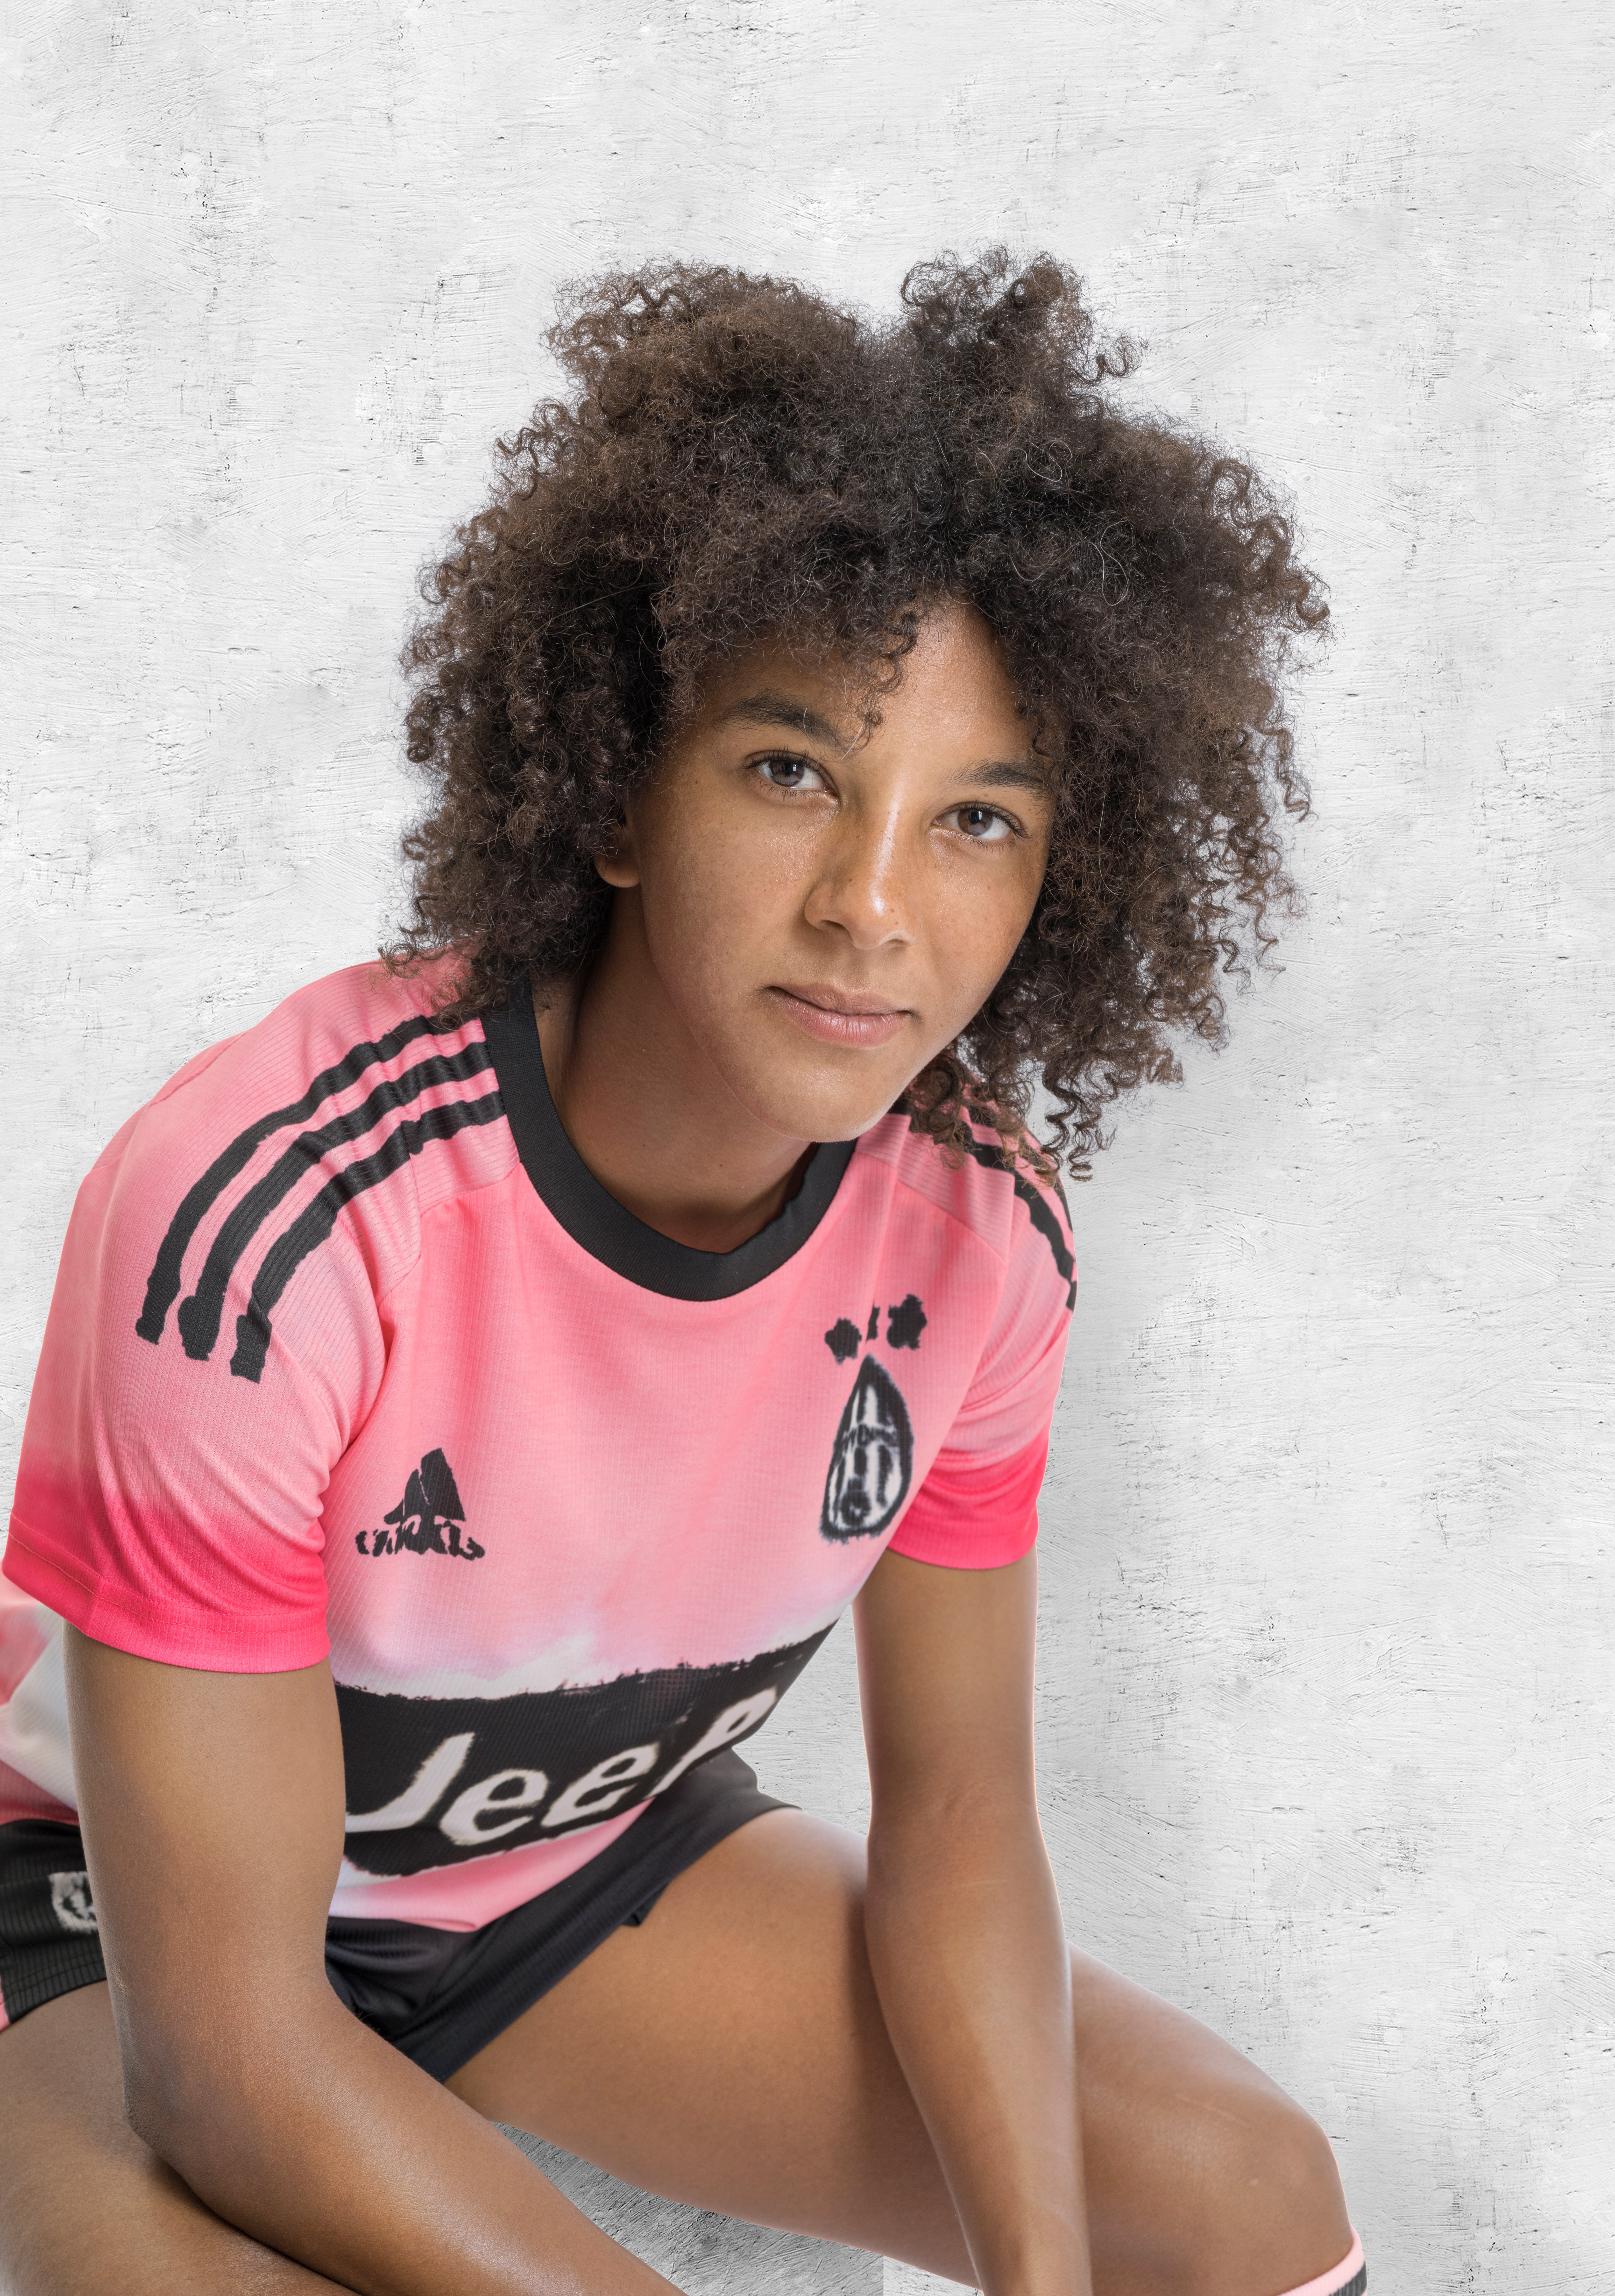 adidas x Pharrell Launch Human Race Jersey Collection - SoccerBible